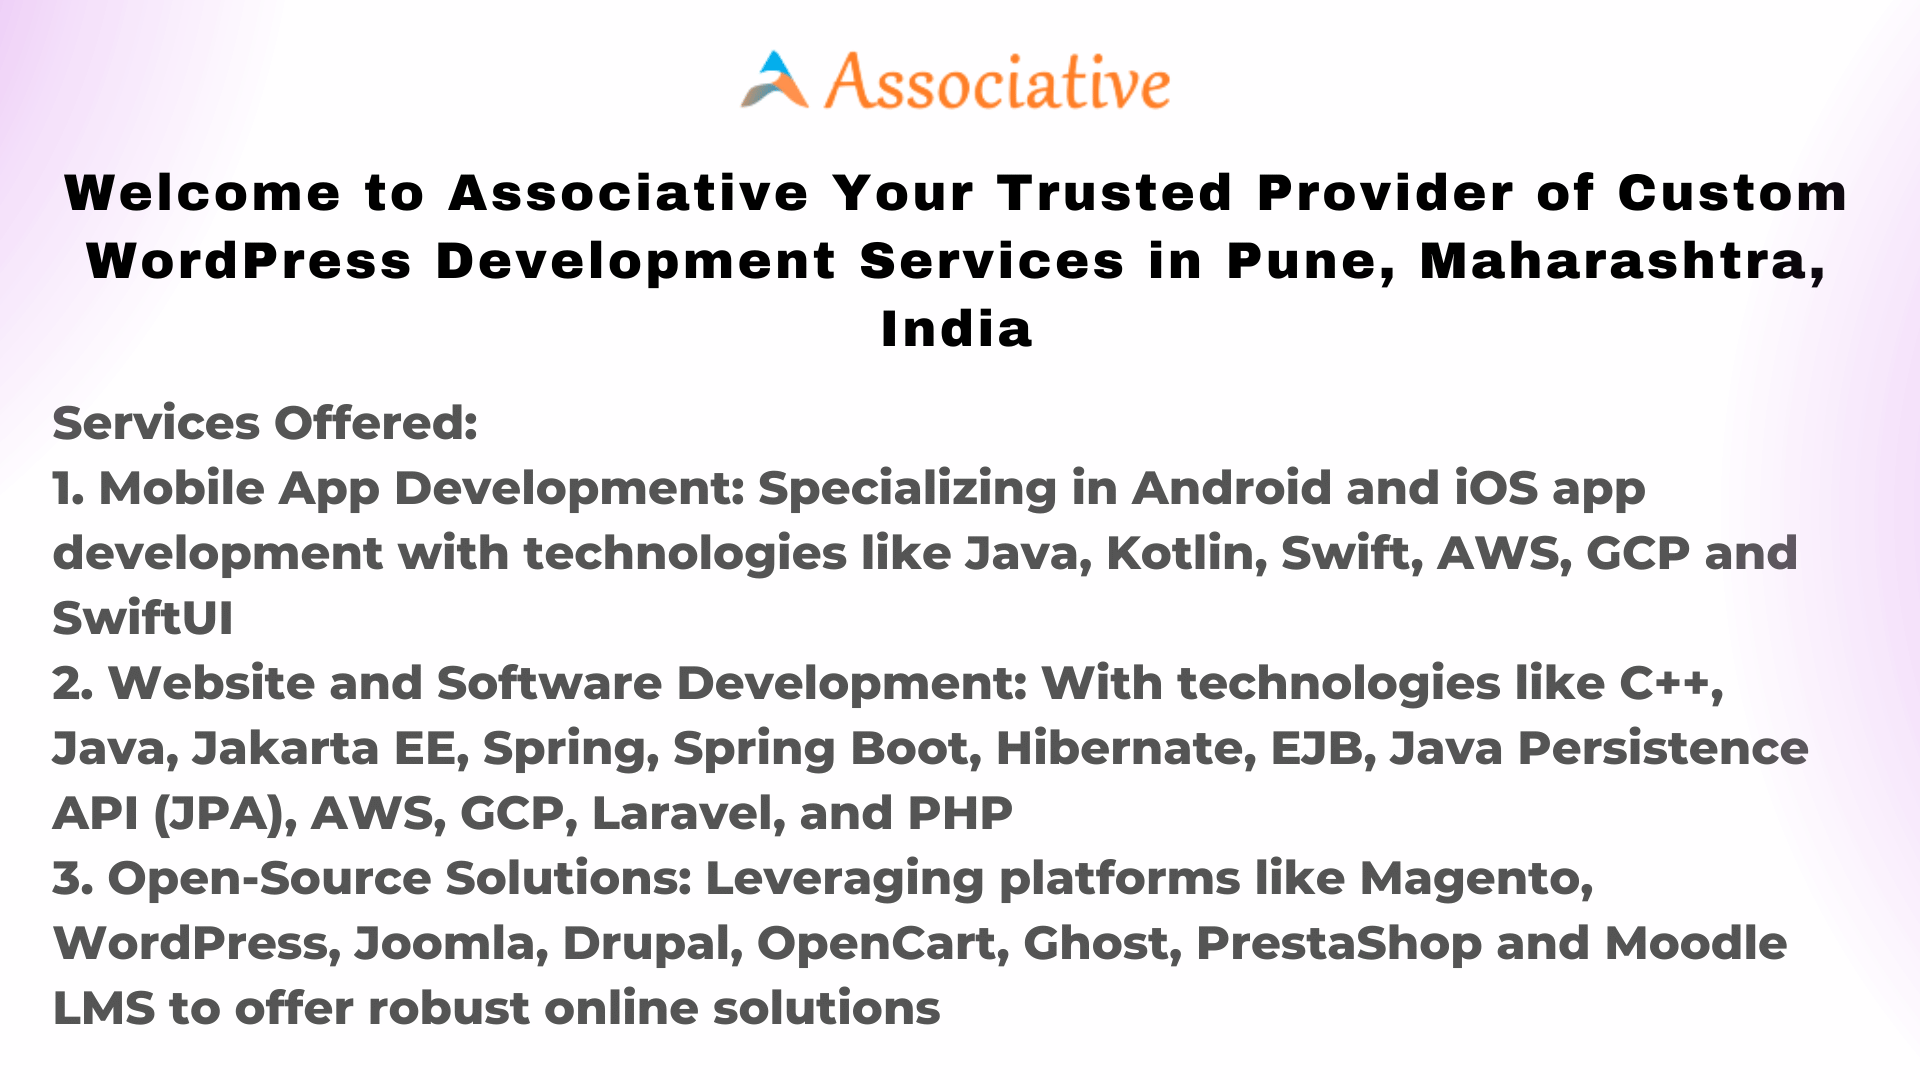 Welcome to Associative Your Trusted Provider of Custom WordPress Development Services in Pune Maharashtra India